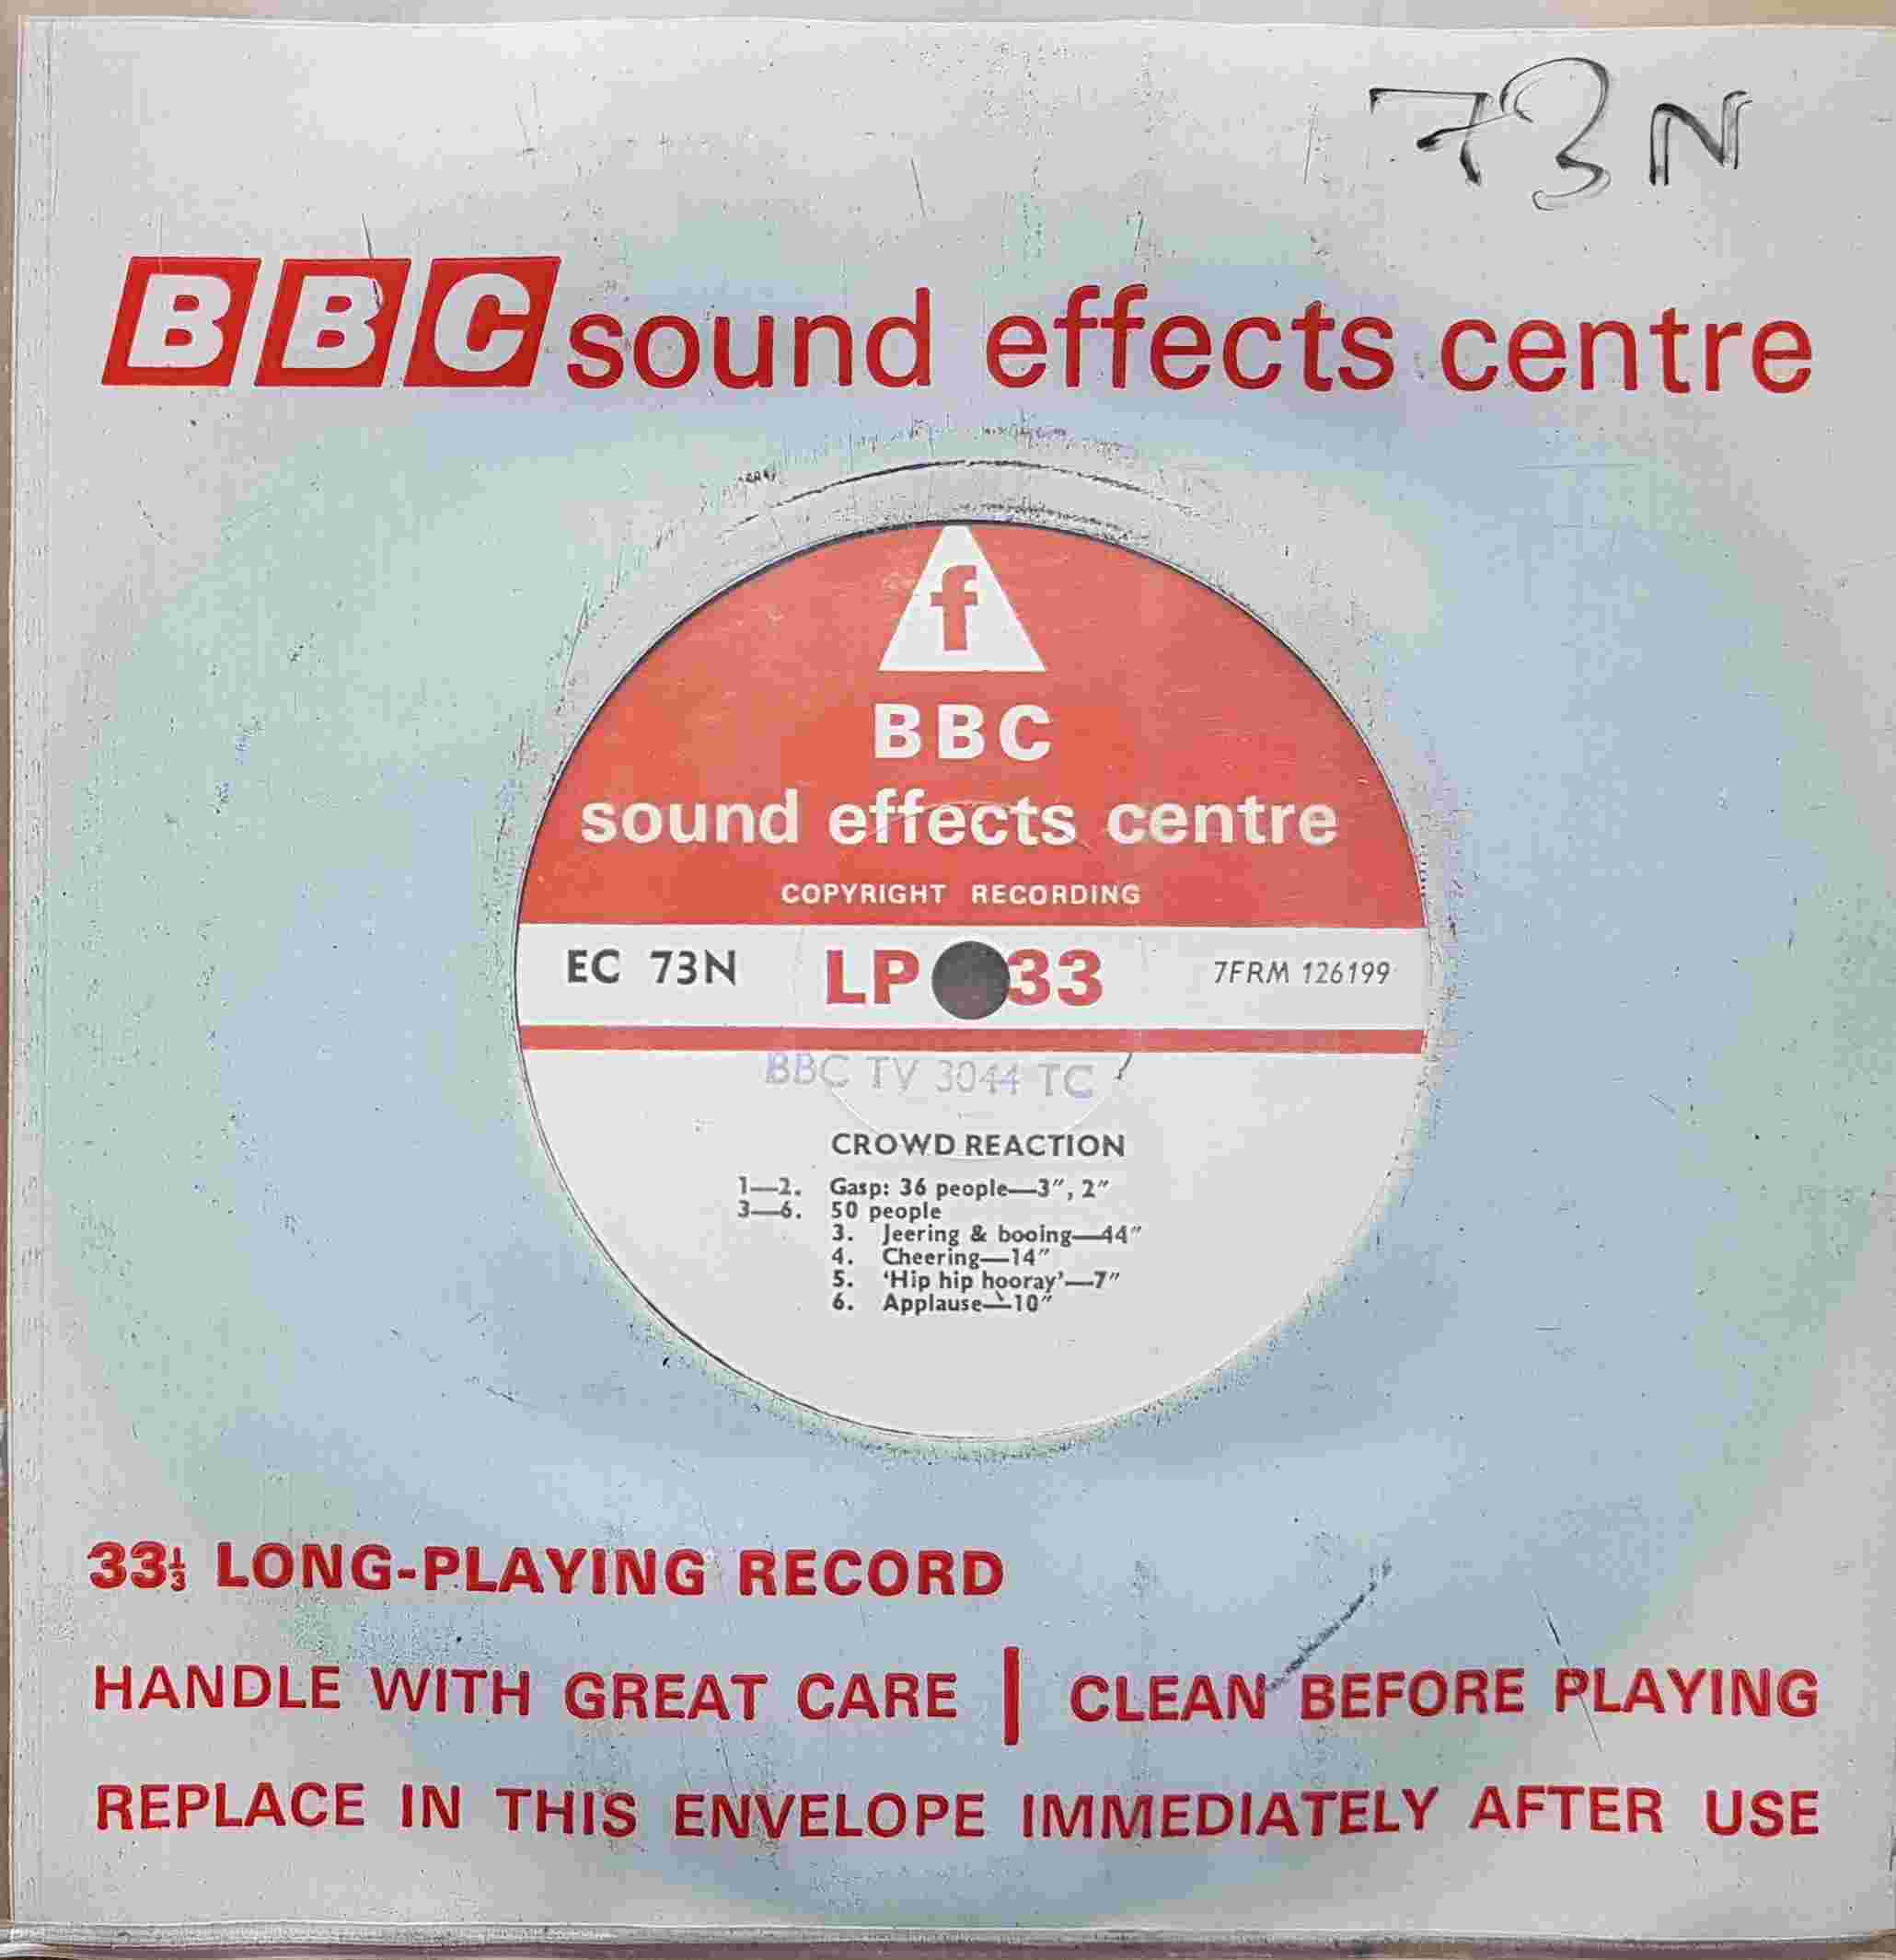 Picture of EC 73N Crowd reaction by artist Not registered from the BBC records and Tapes library